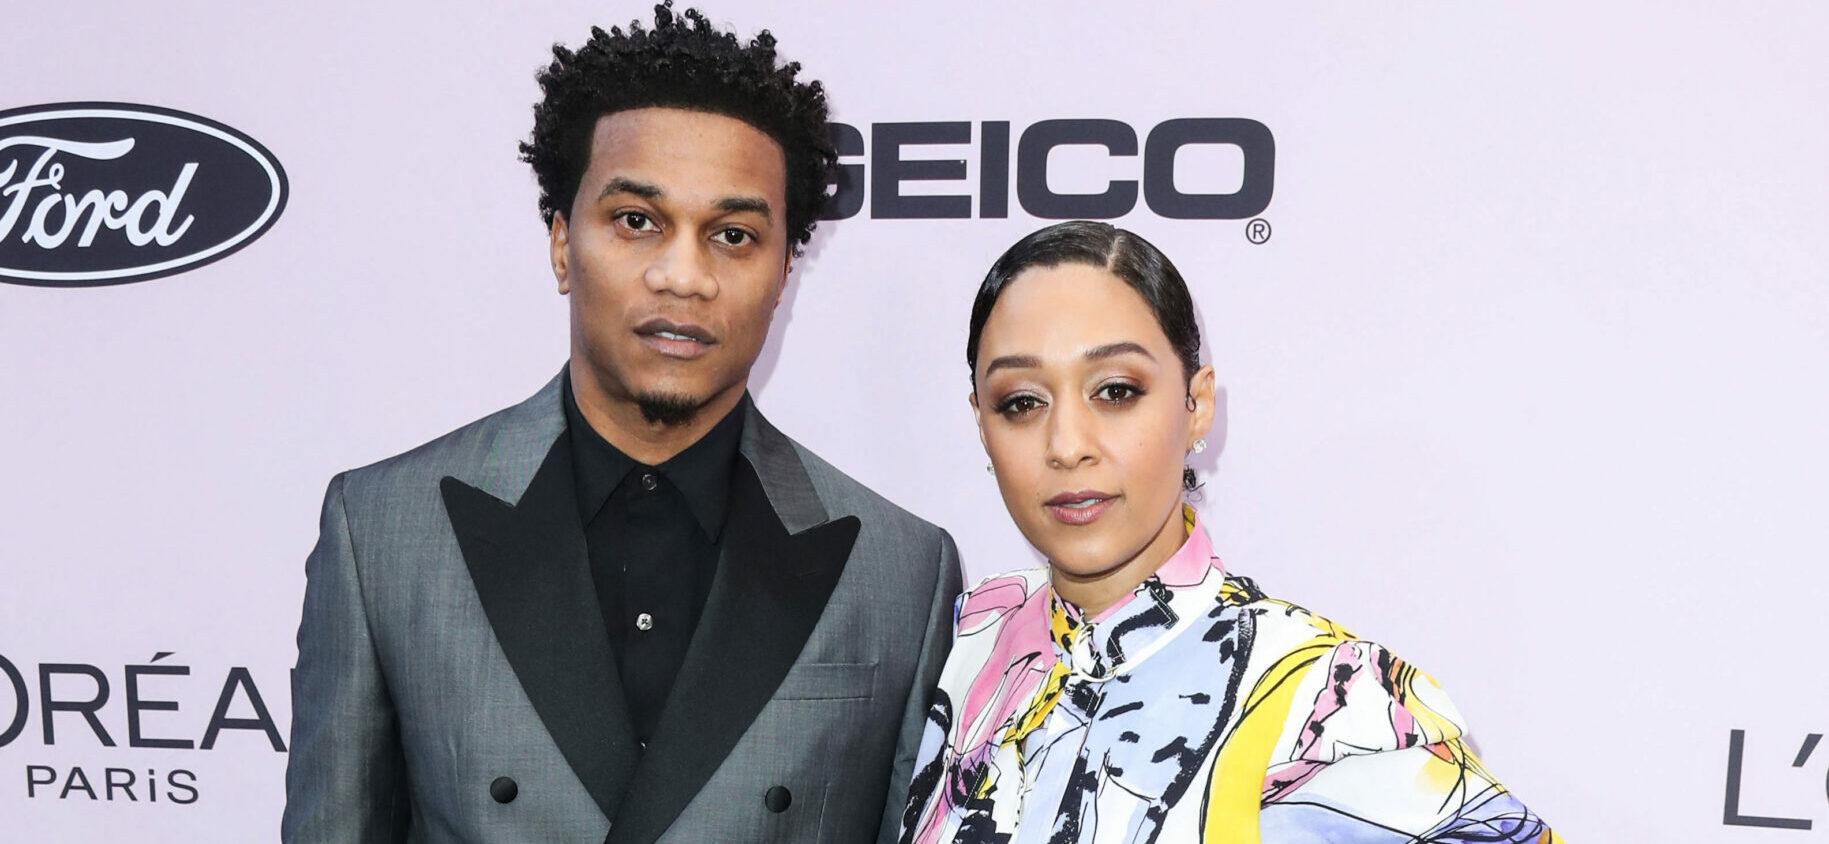 Tia Mowry Files For Divorce From Cory Hardrict After 14 Years Of Marriage.